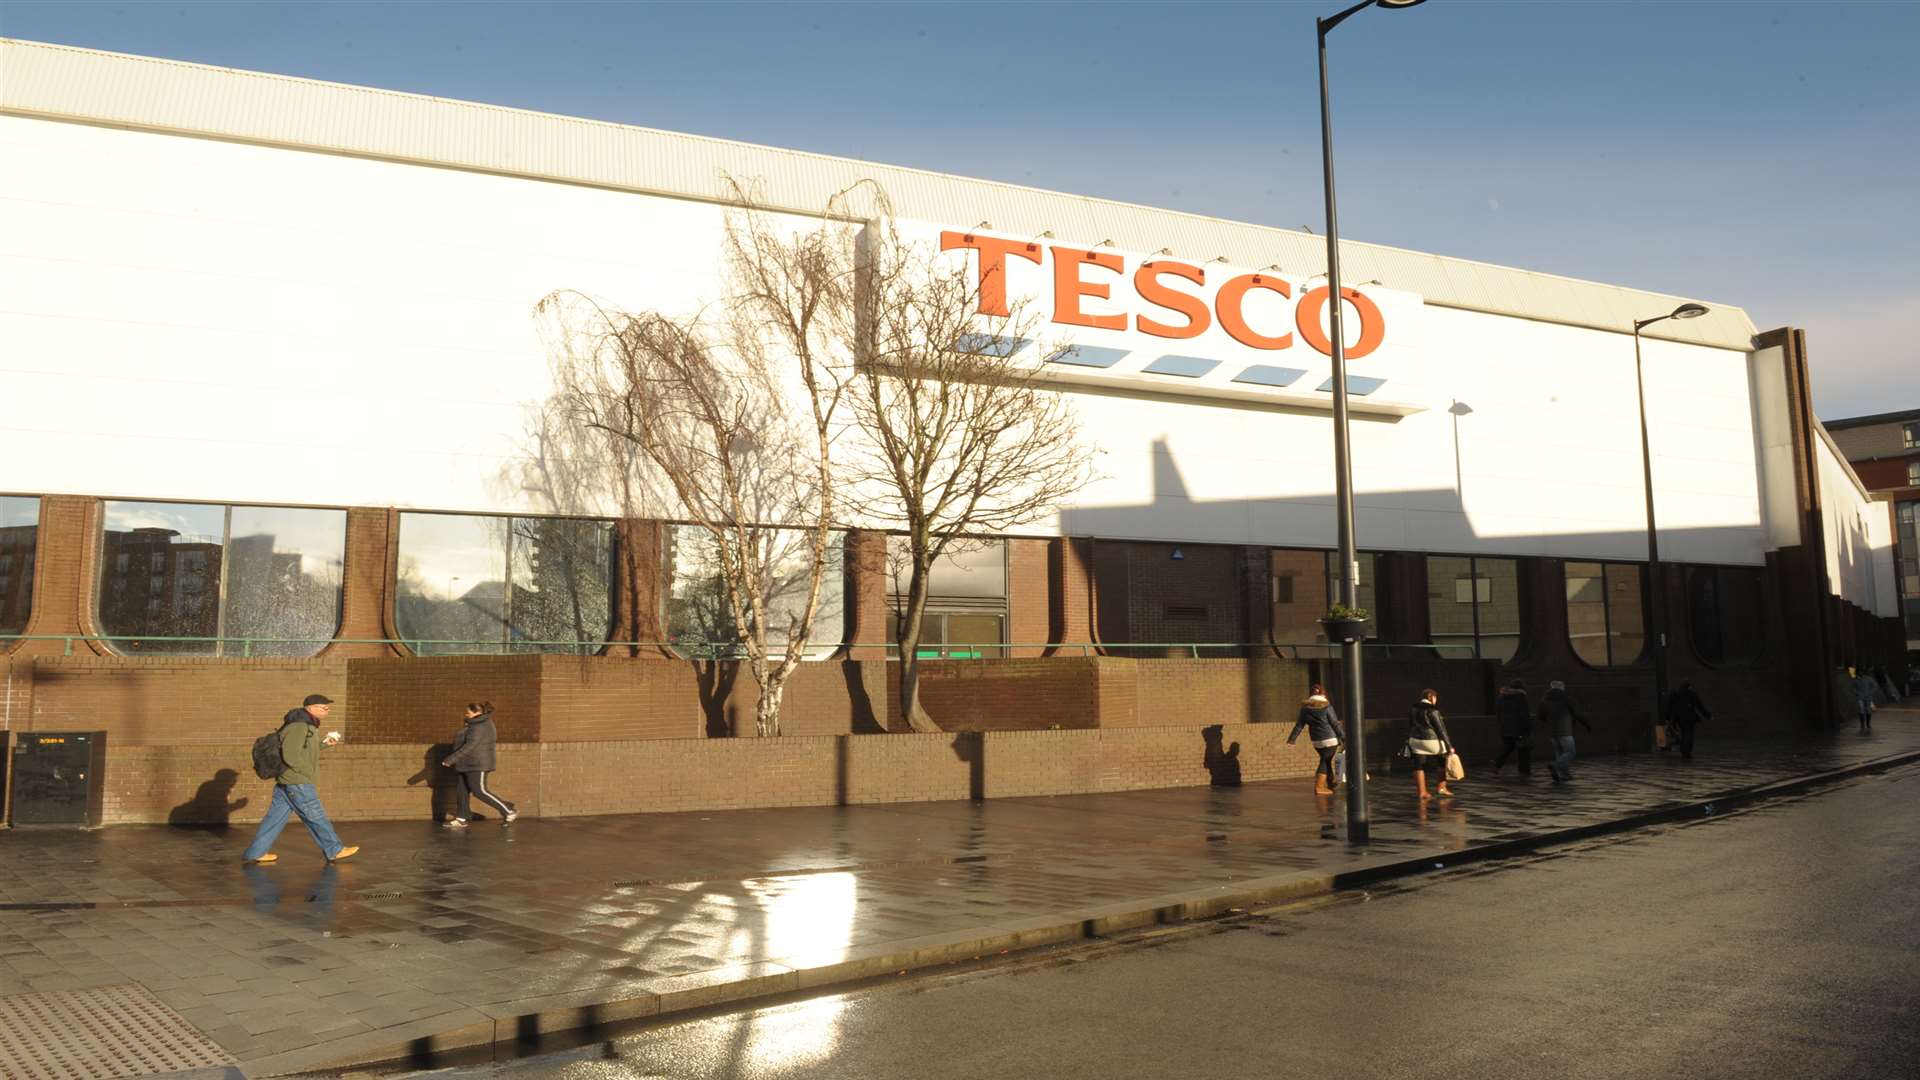 Tesco's store in Chatham closed on April 4